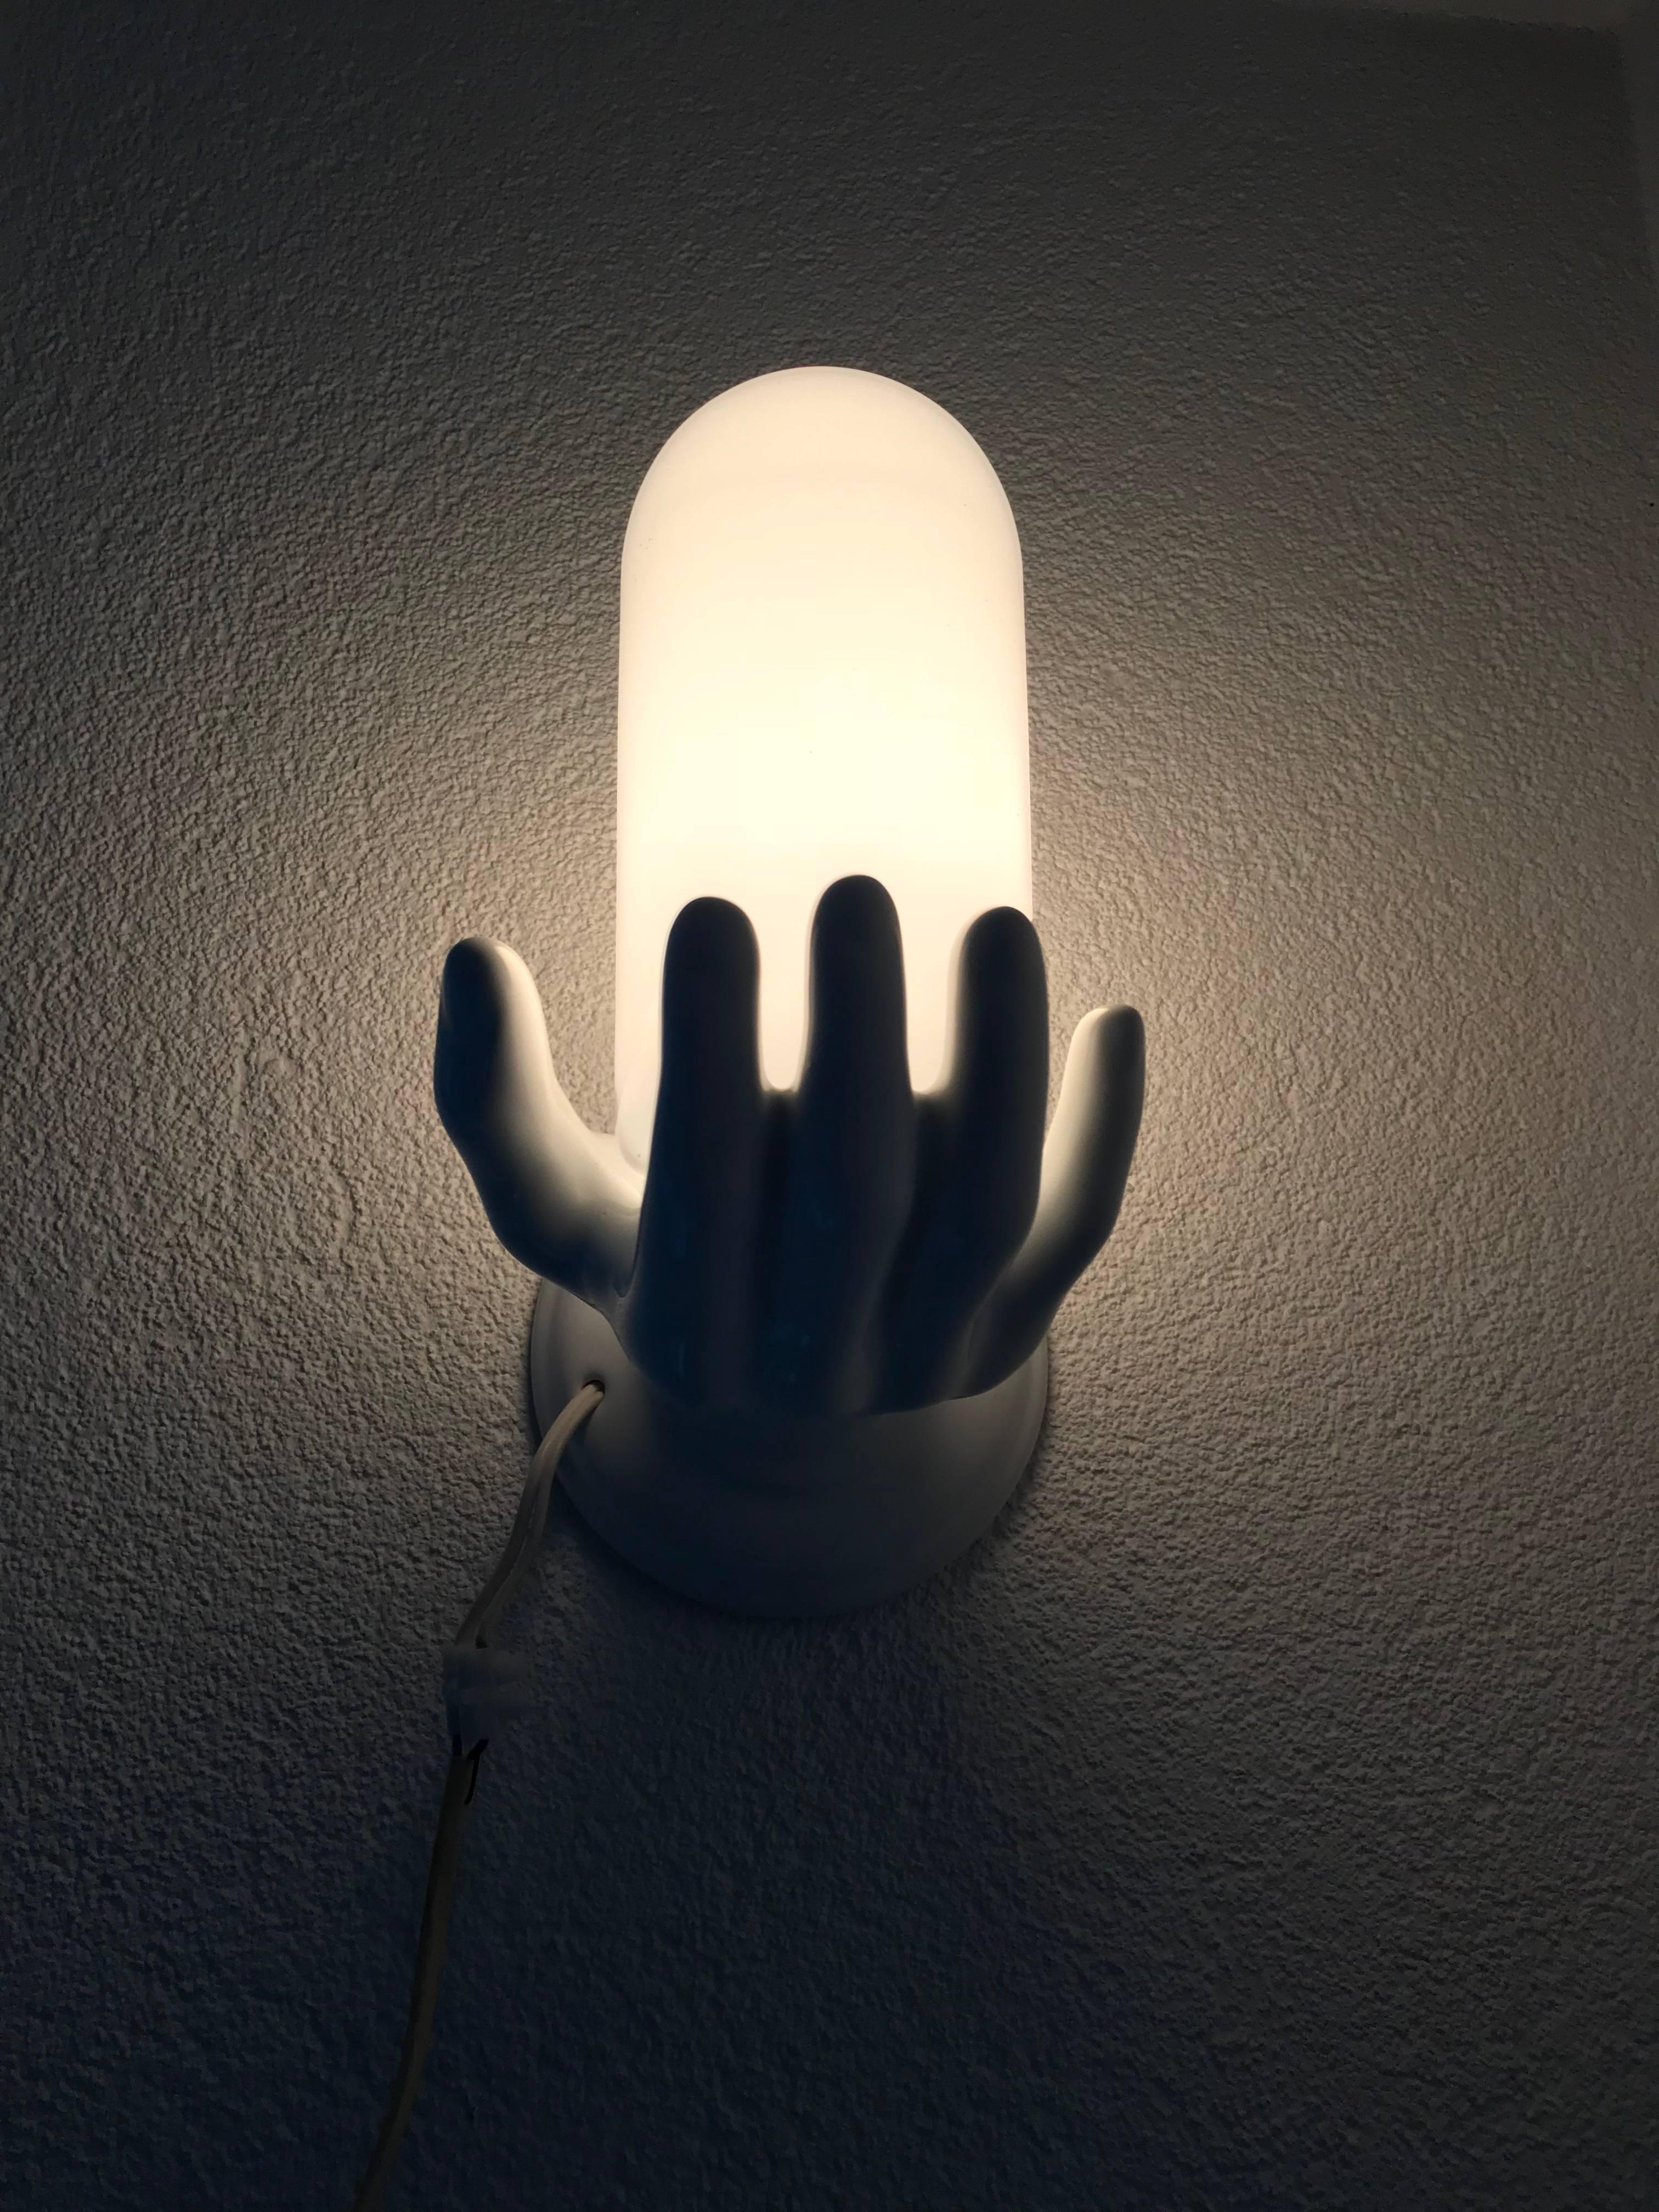 1970s Glazed White Ceramic Right Hand Holding a Glass Wall Sconce or Wall Light 4